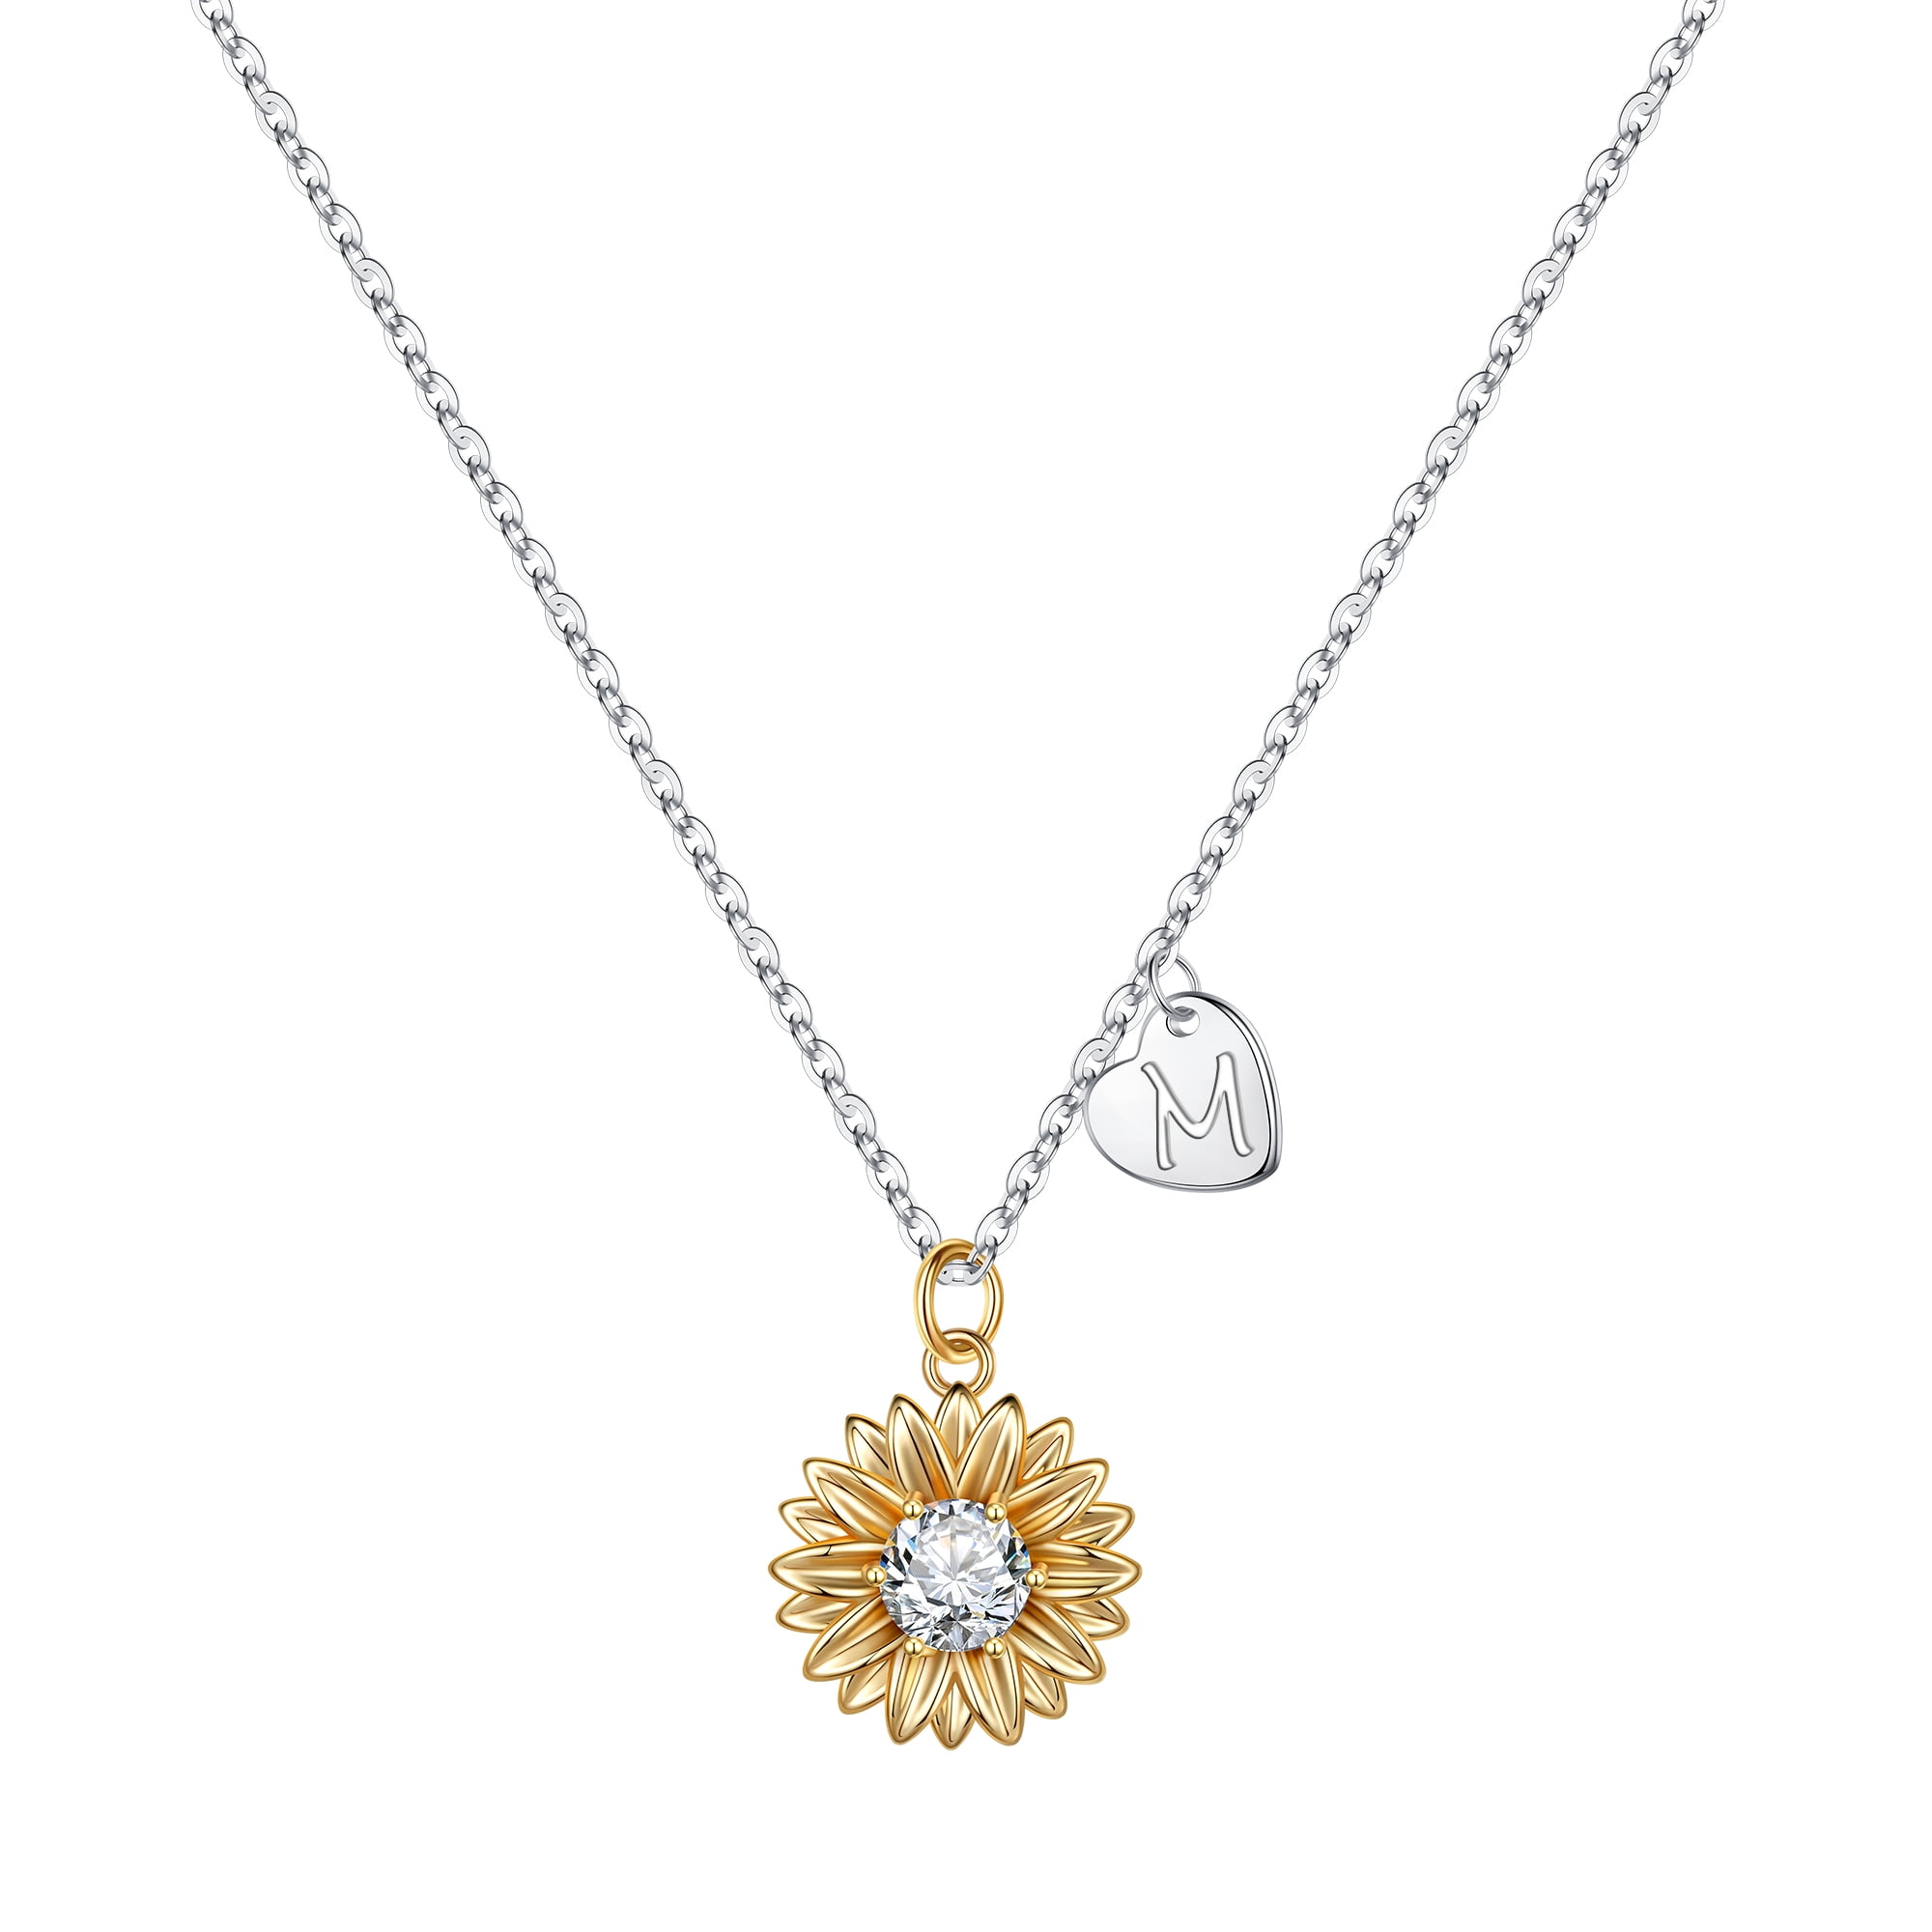 Yesteel Initial Sunflower Necklaces for Women 14k Gold Plated Sunflower  Necklace CZ Heart Initial Letter Sunflower Pendant Necklace You Are My 